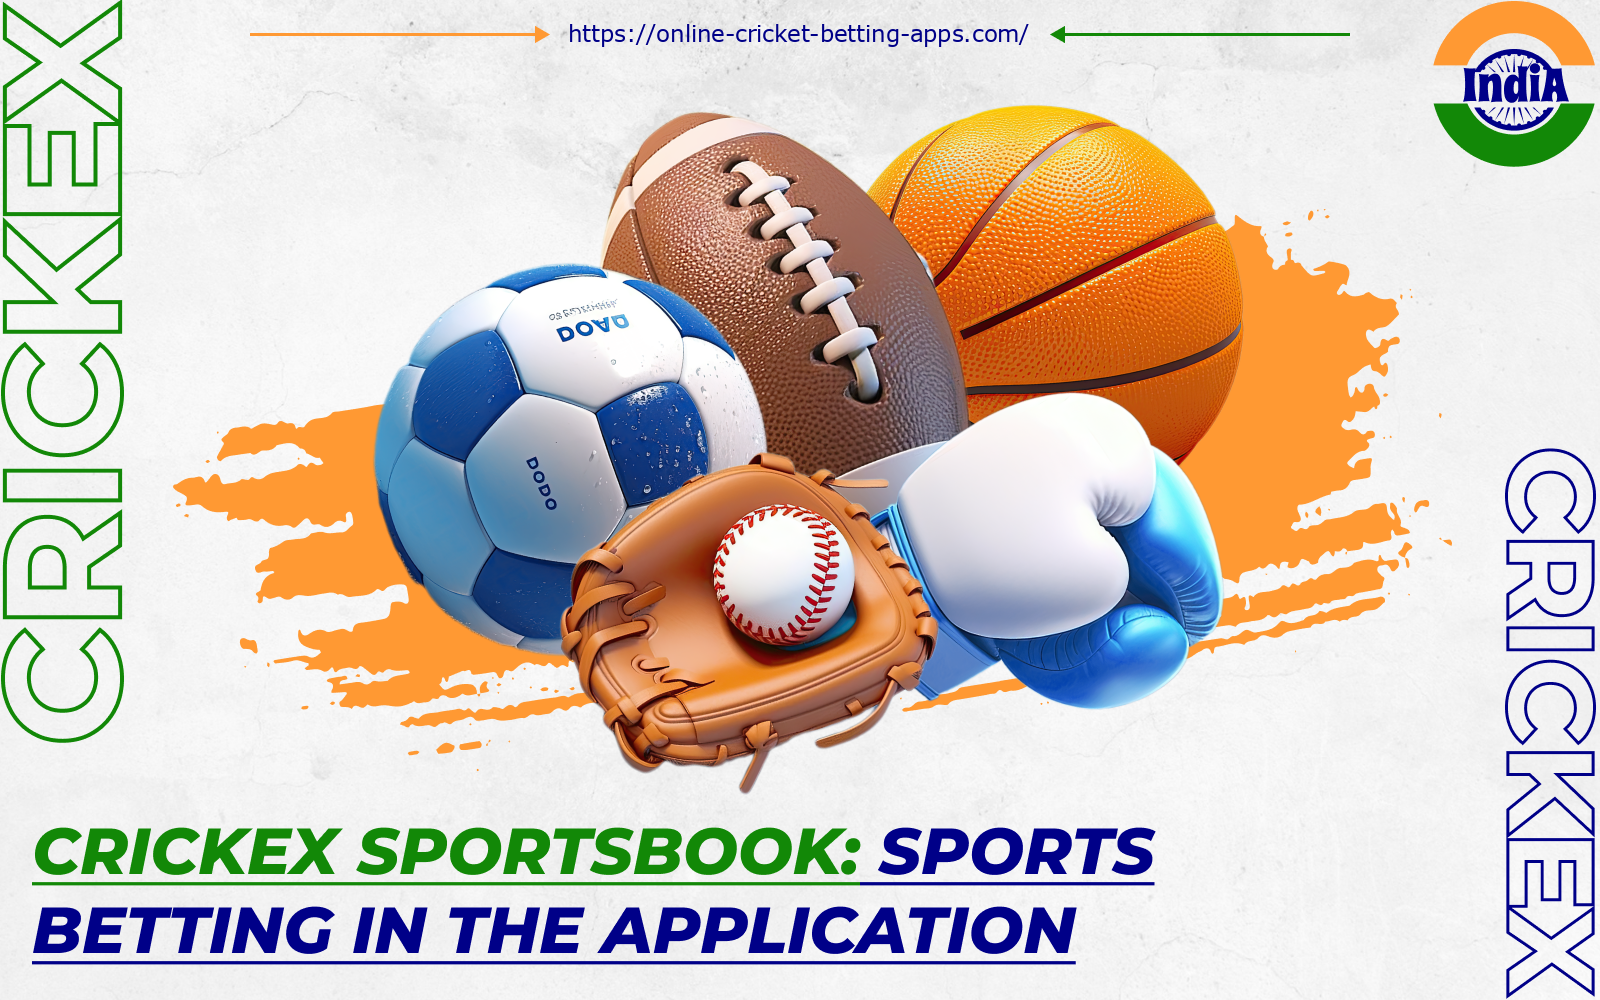 With the Crickex mobile app, players from India can bet on any popular match in no time at all